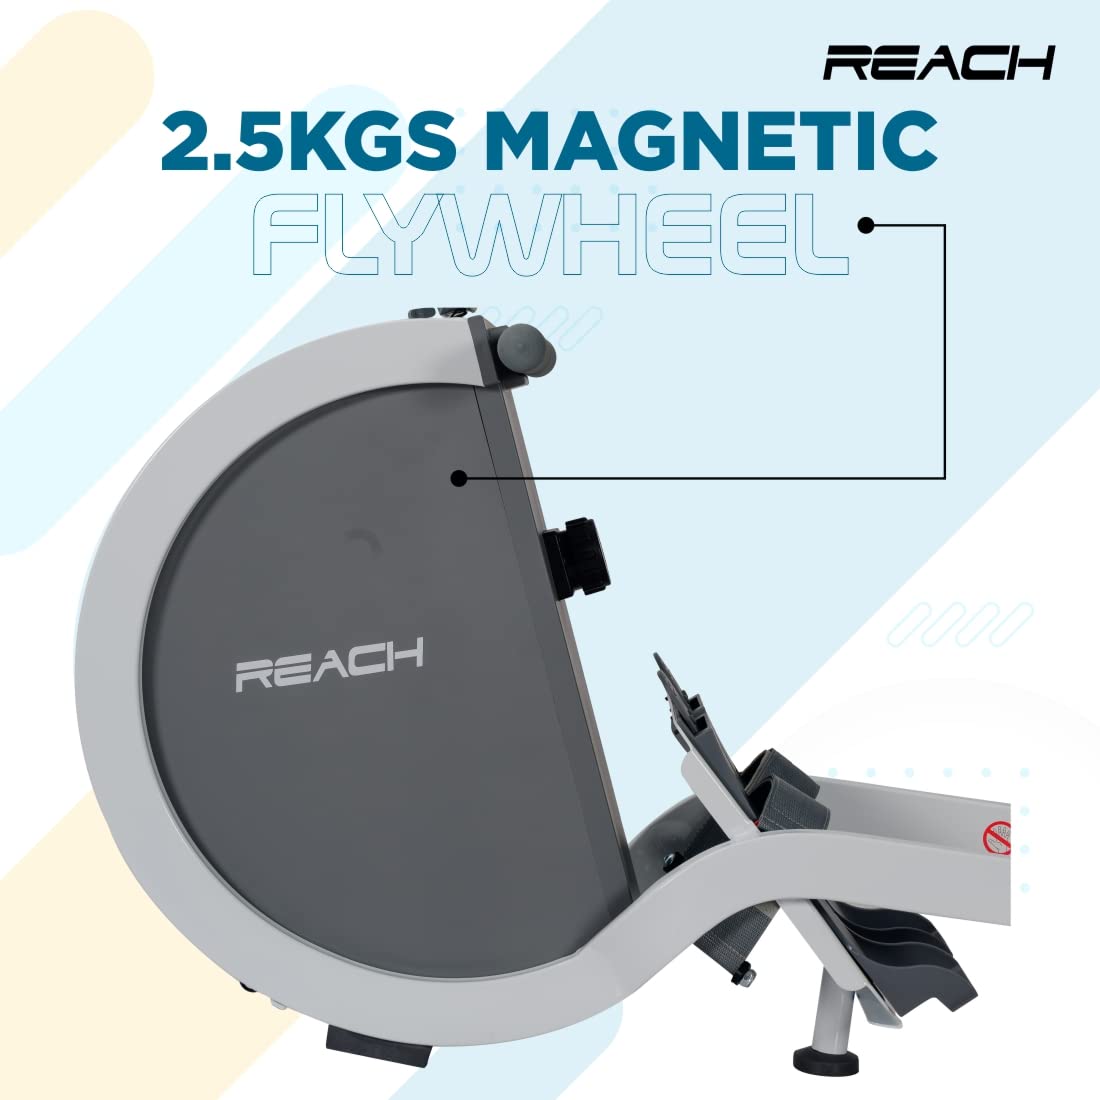 Reach RW-1000 Rowing Machine for Full Body Workout at Home Gym | Foldable Rower Machine with Magnetic Resistance, LCD Display & Flywheel | Rower Equipment for Core Strength & Glutes | Maximum User weight 130kgs